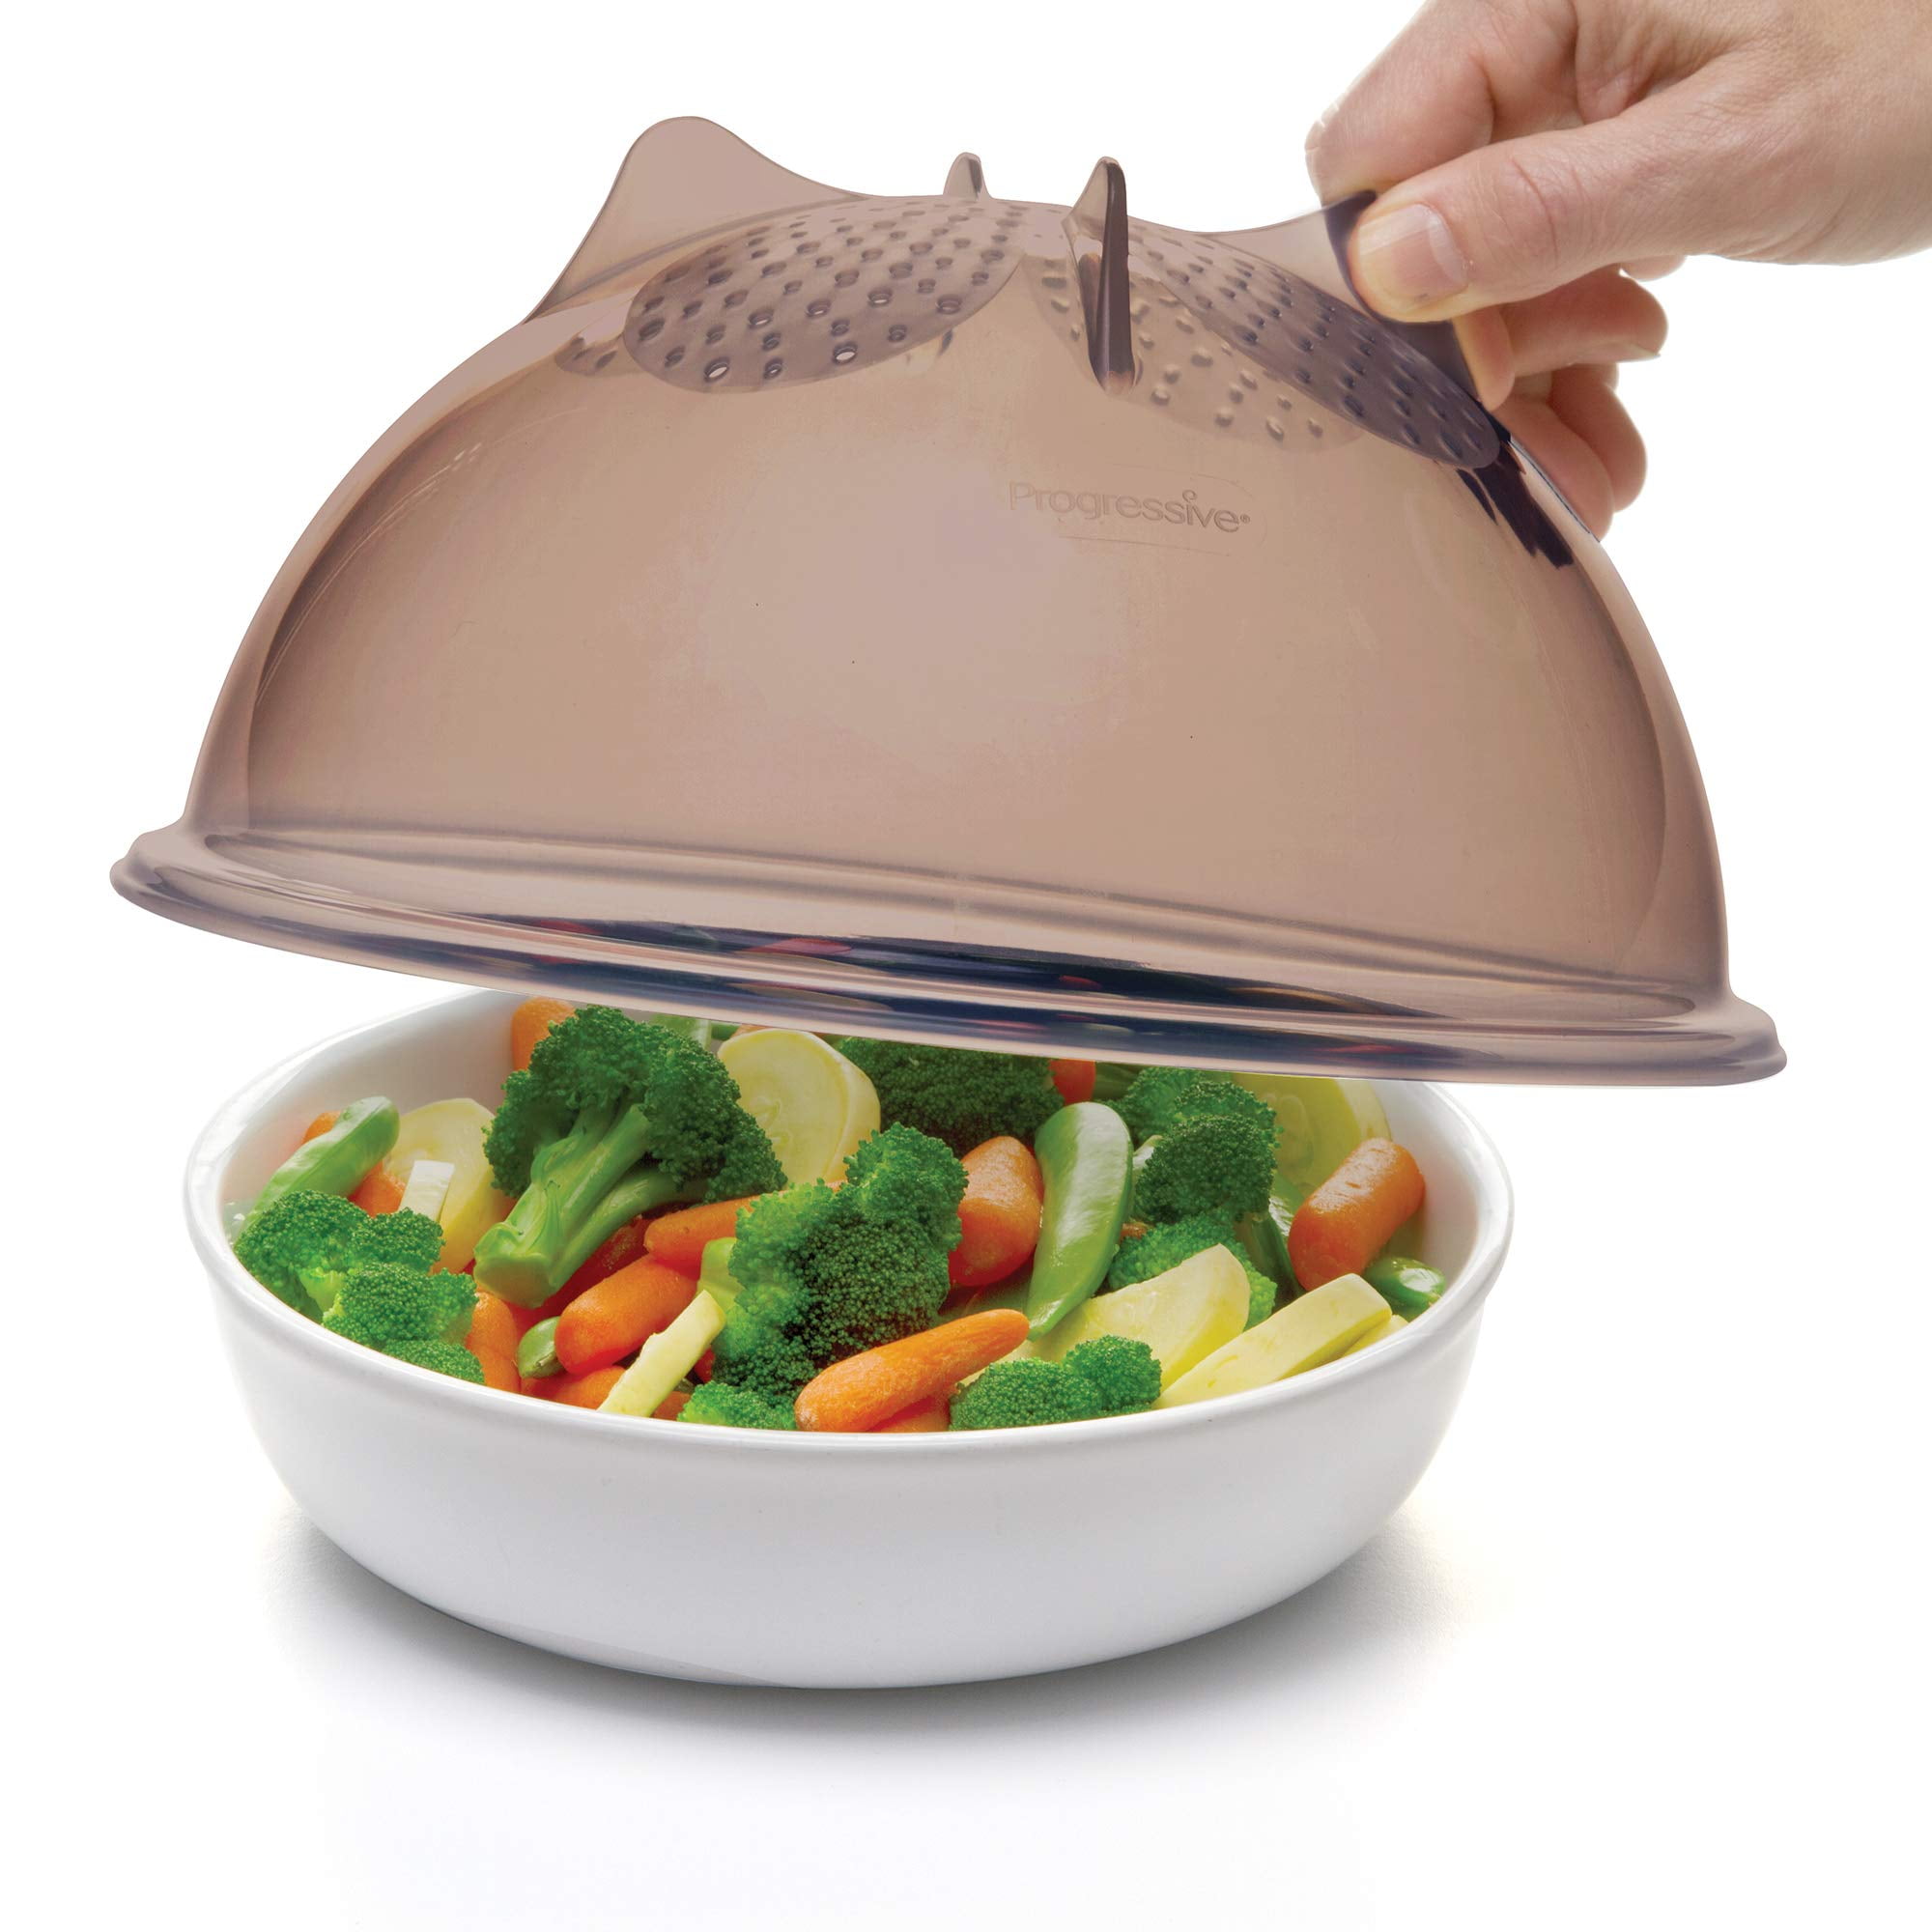 Progressive Collapsible Microwave Food Cover - Gray